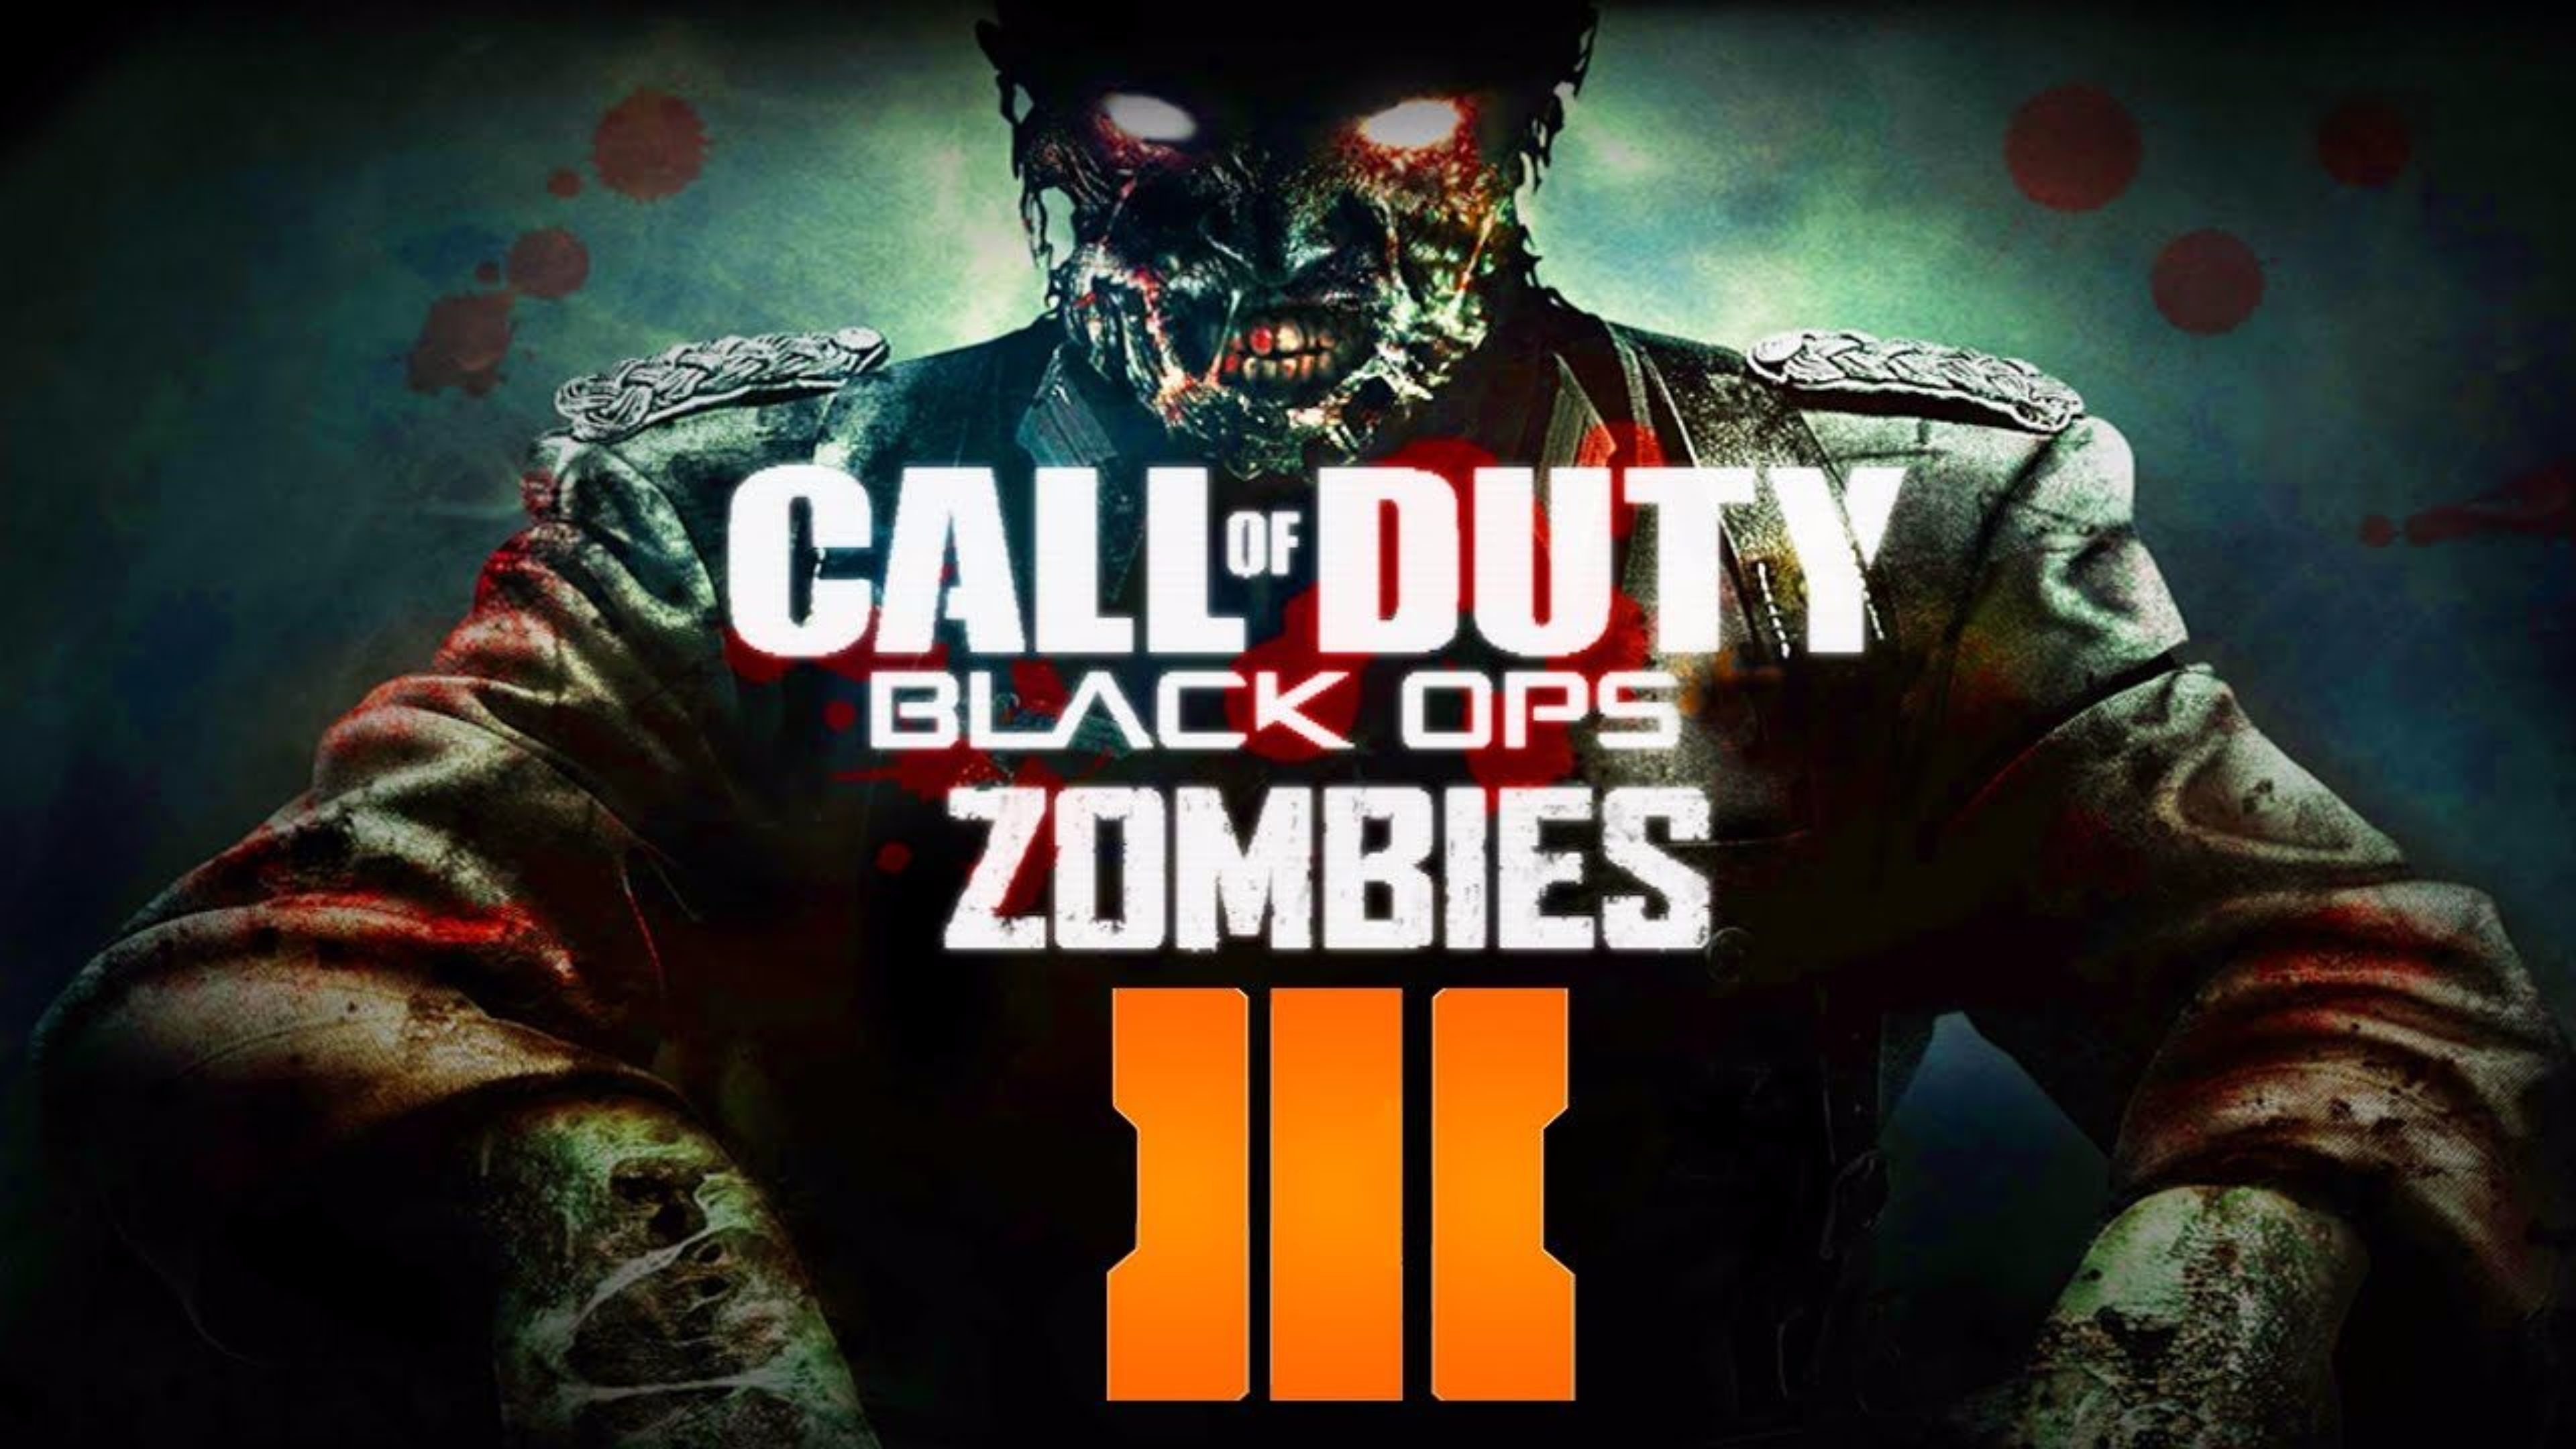 Zombies Call of Duty Black Ops 3 4K Wallpaper